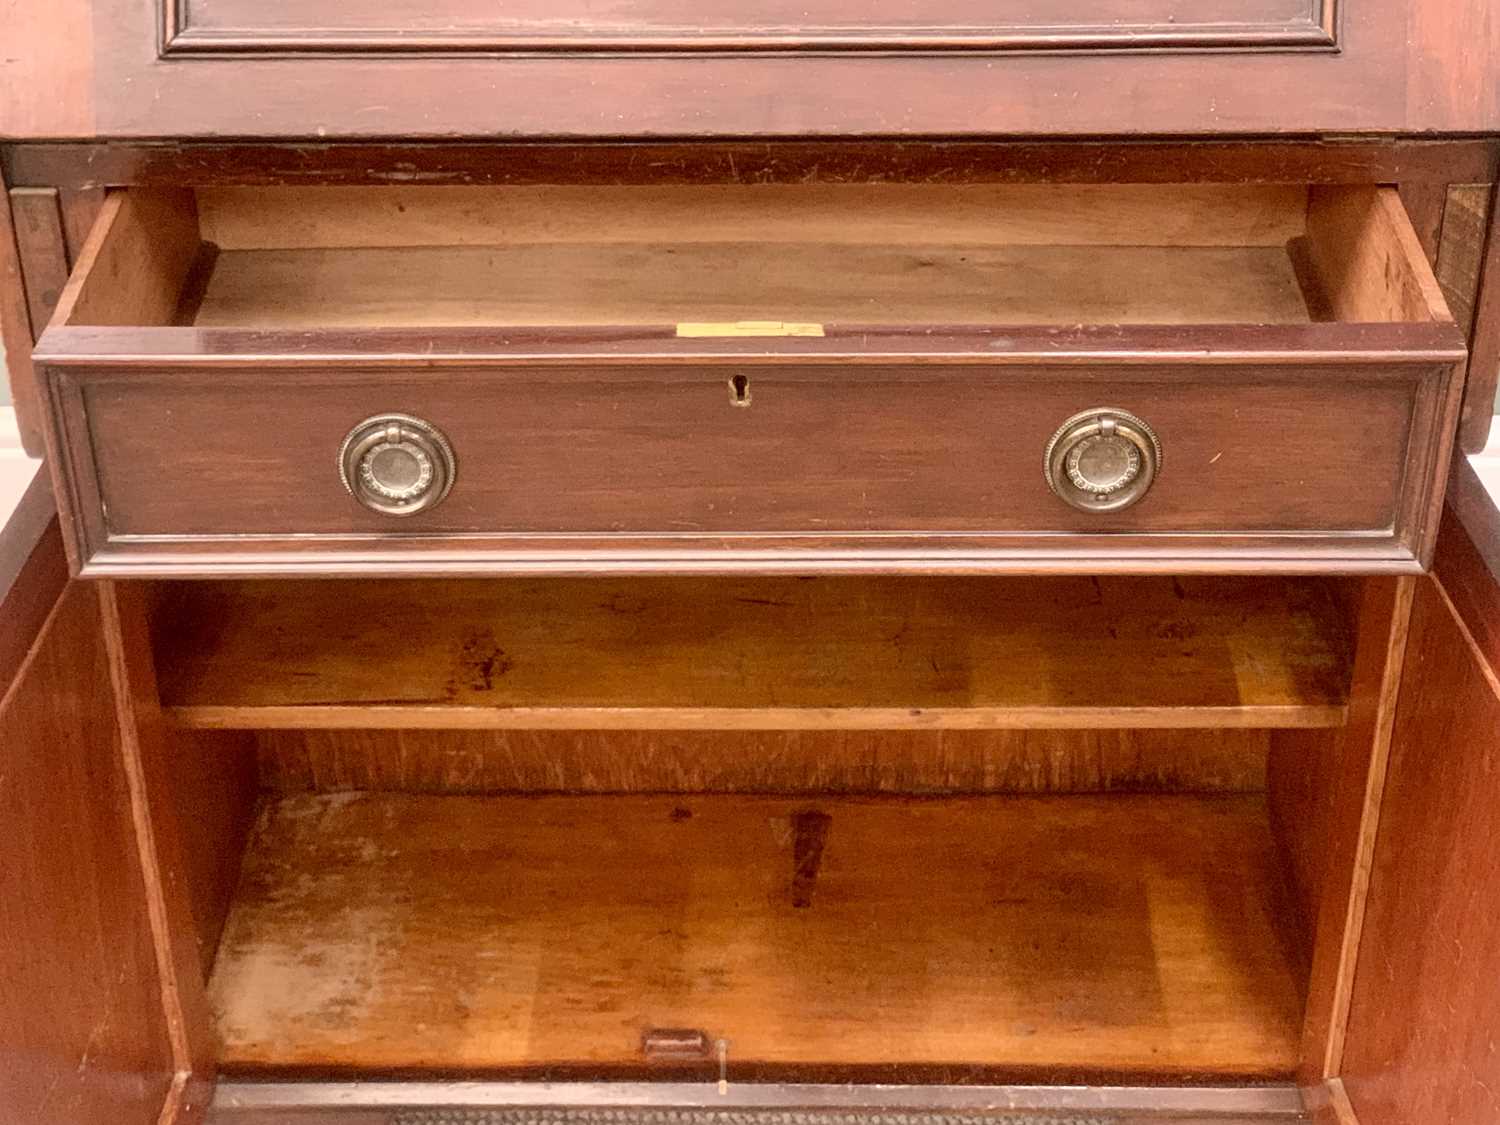 AN EDWARDIAN MAHOGANY BUREAU BOOKCASE having a twin door leaded-glass upper section over a fall - Image 4 of 12